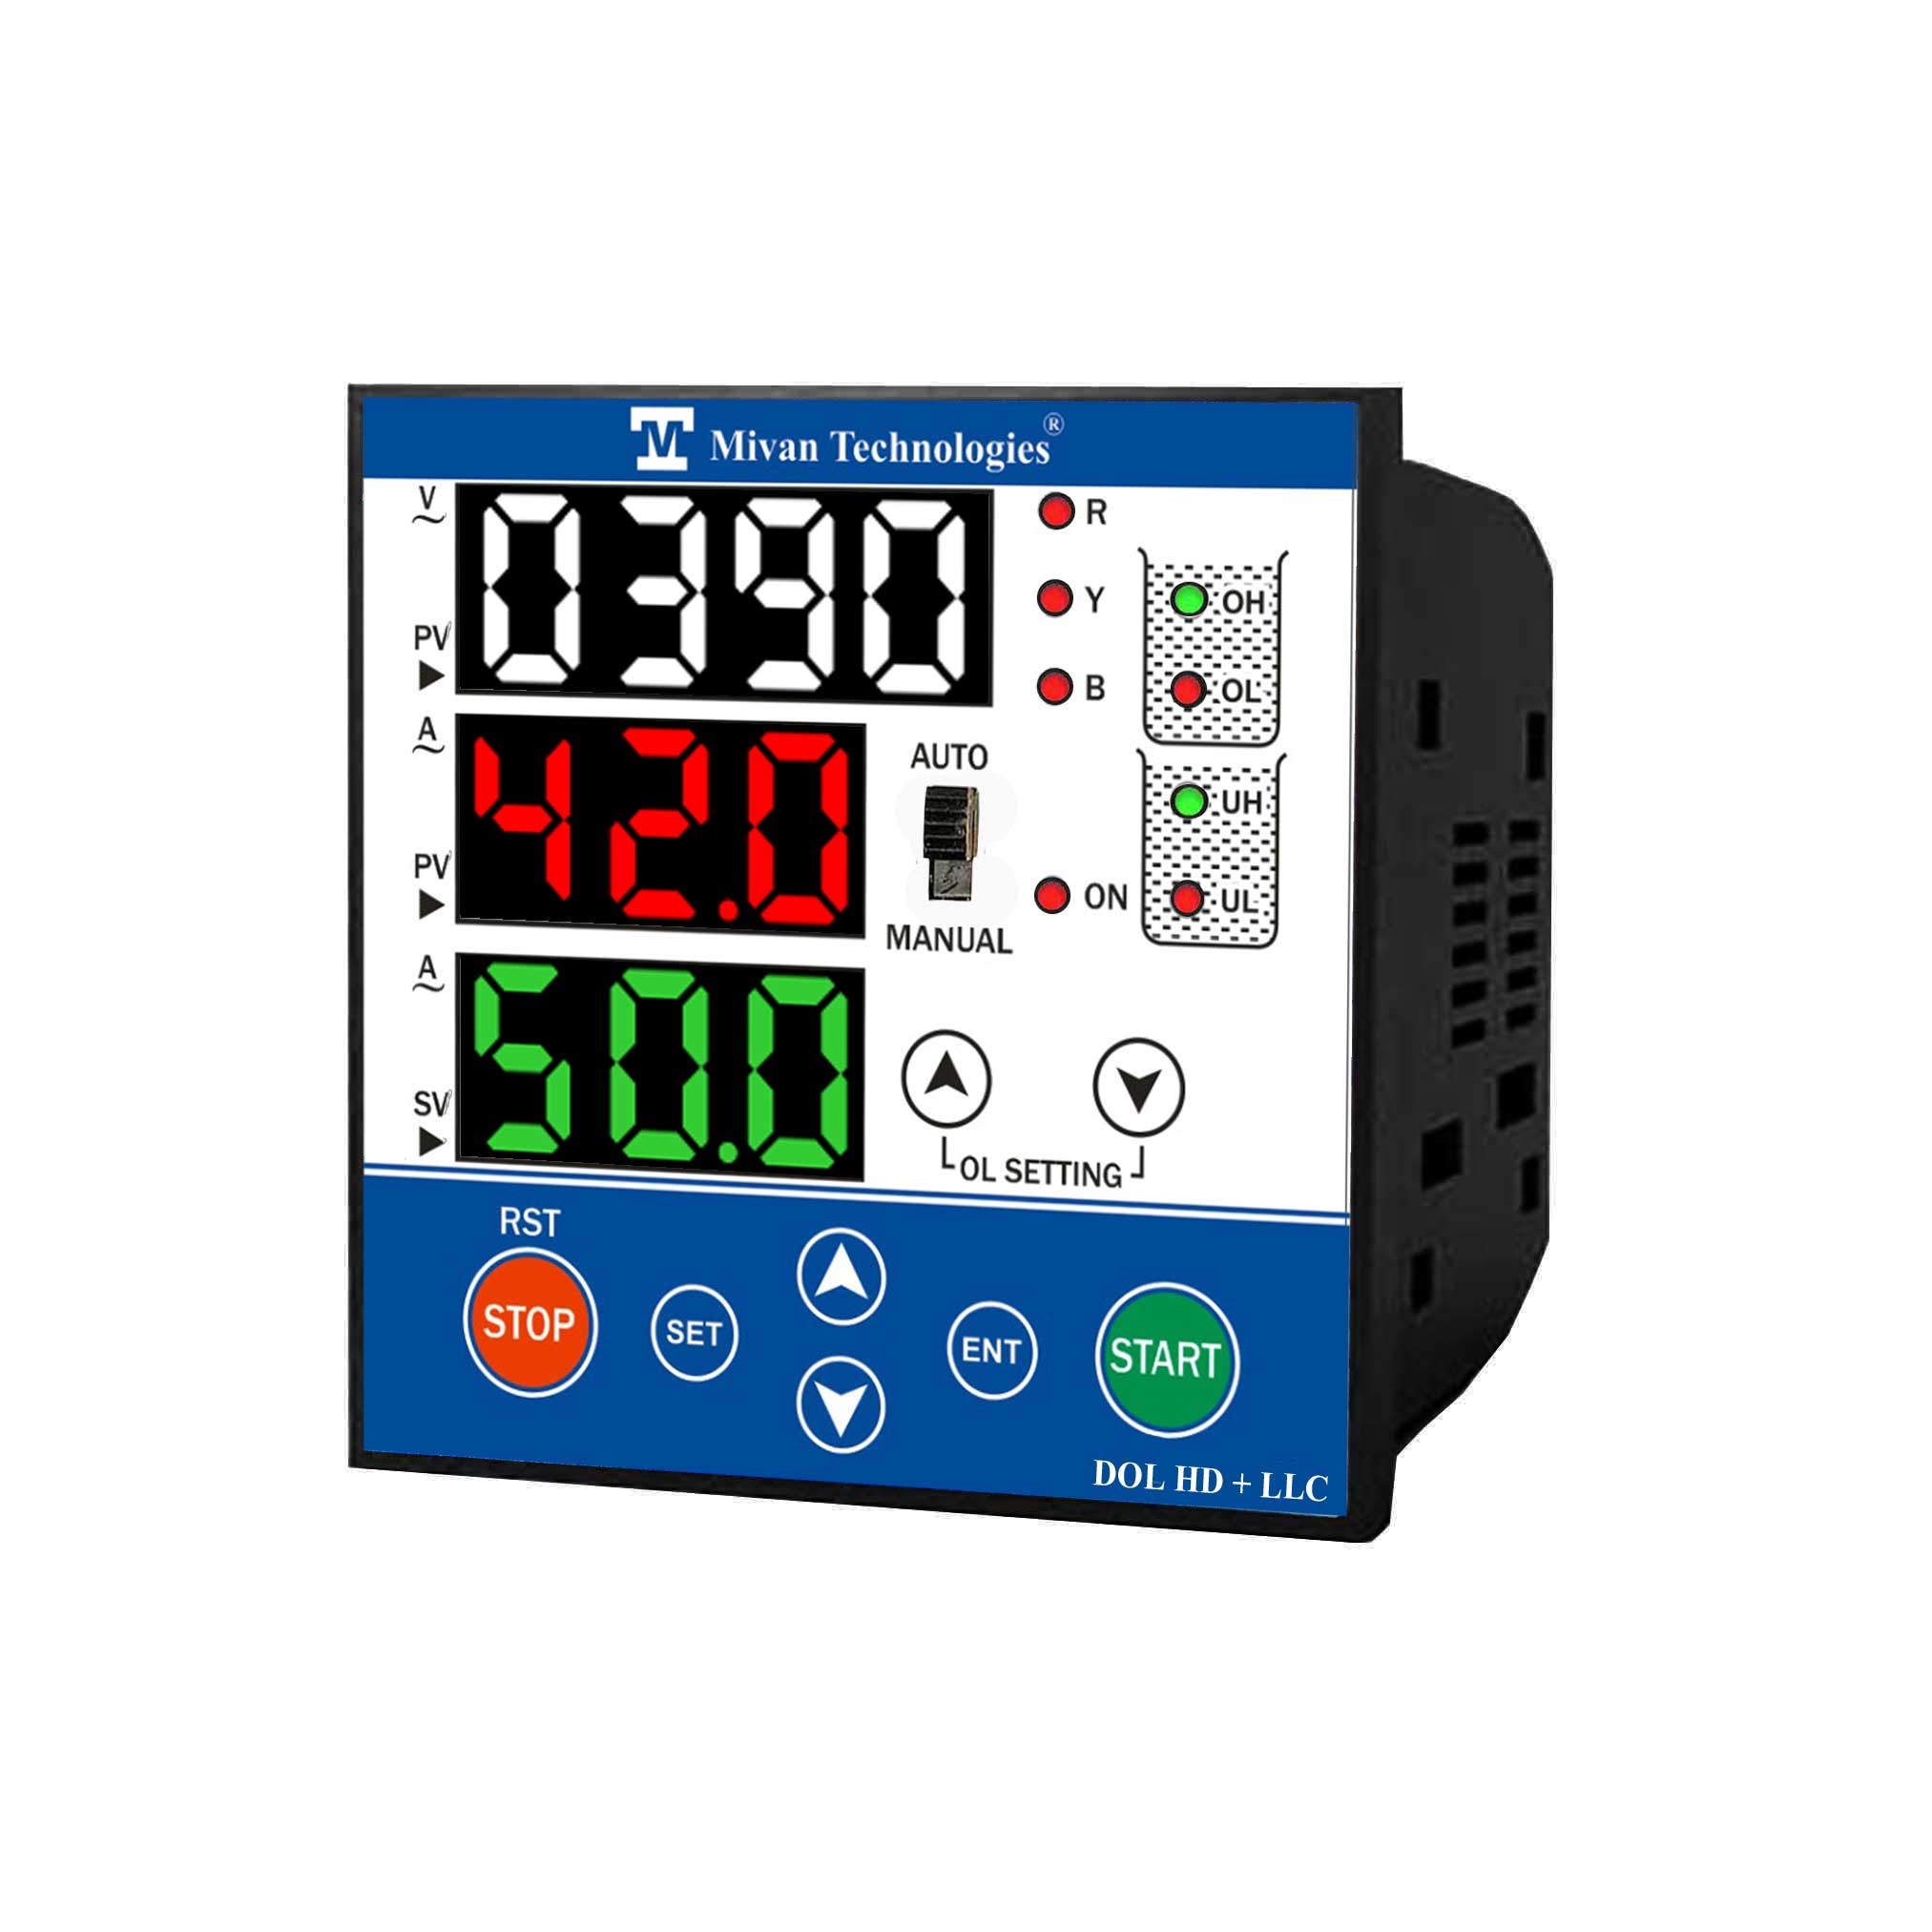 DOL 3D W 3 display instrument with water level controller to design any hp DOL starter to provide HV LV OL Dry protection with timer spp auto switch